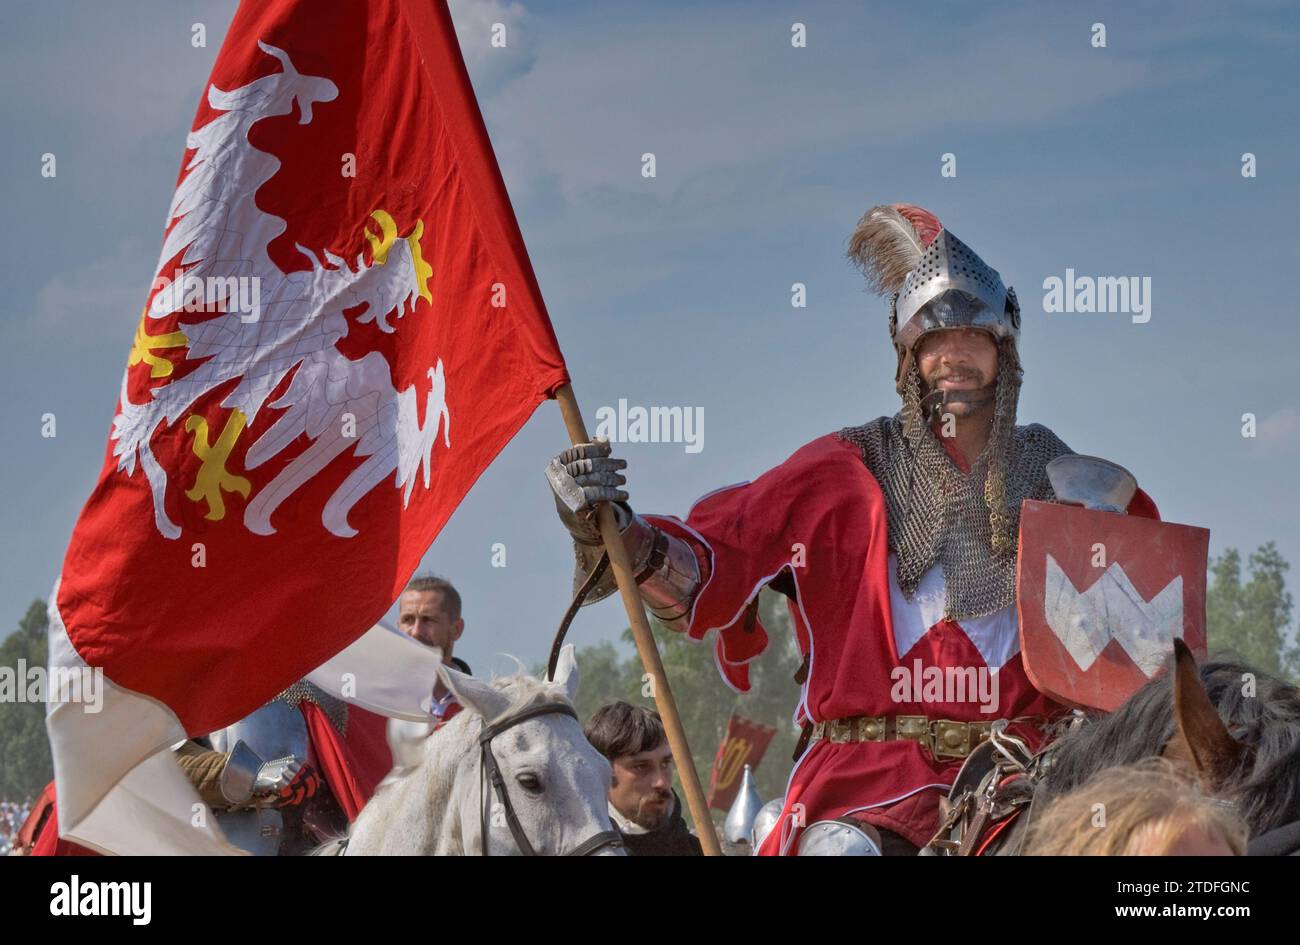 Sword-bearer of Polish Crown leaving battleground after recreating Battle of Grunwald which took place in 1410 when Polish and Lithuanian troops broke the power of Teutonic Knights, near village of Grunwald Warminsko-Mazurskie, Poland Stock Photo